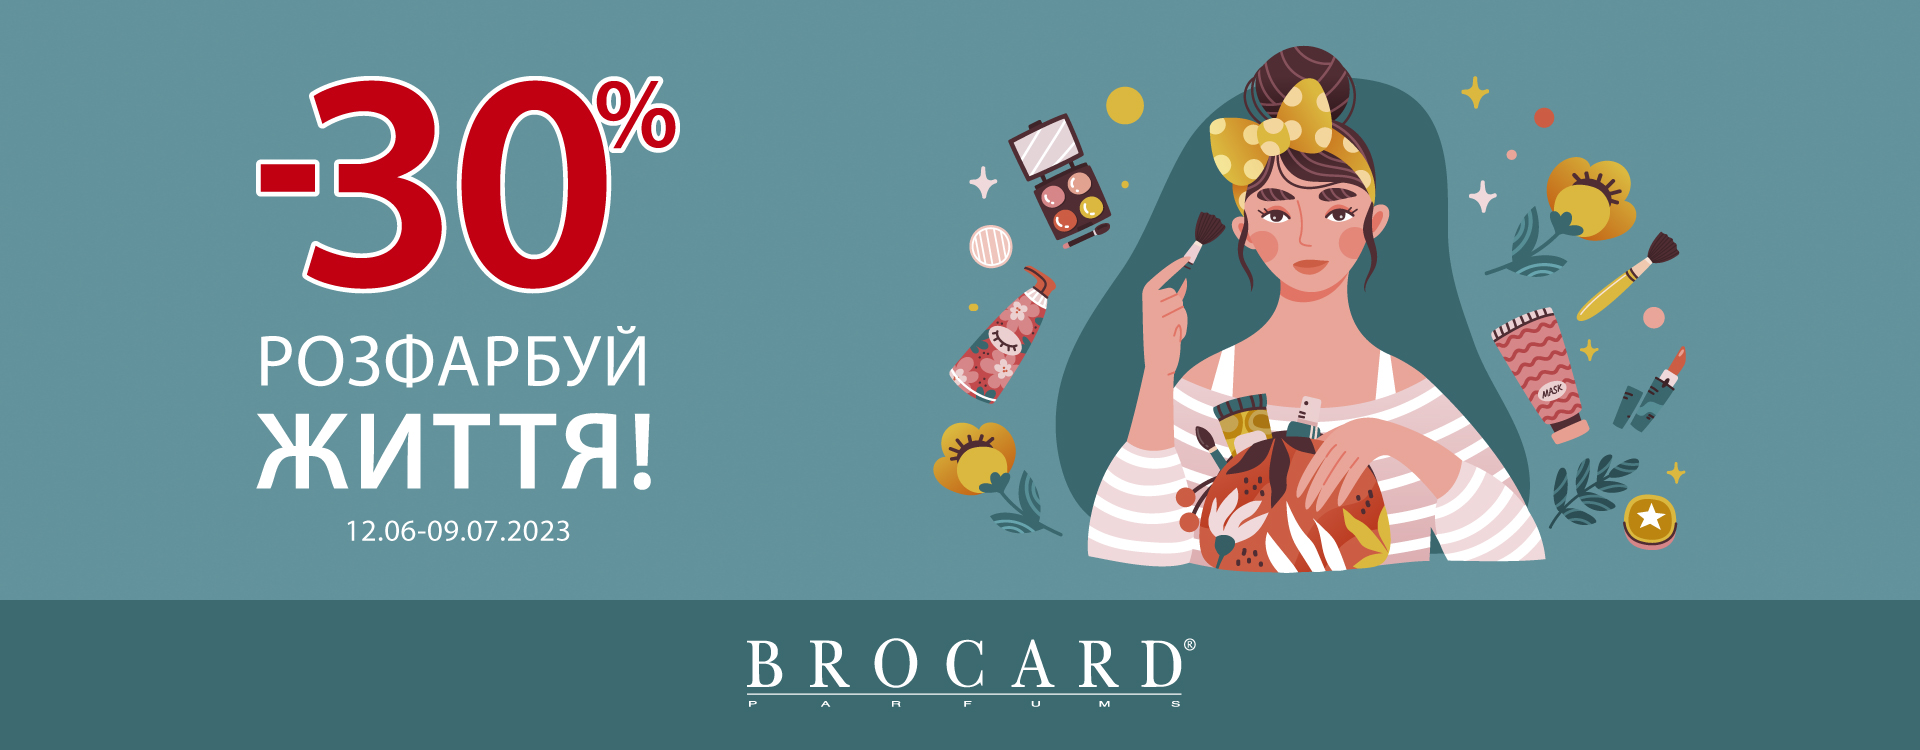 30% discount on cosmetics at BROCARD